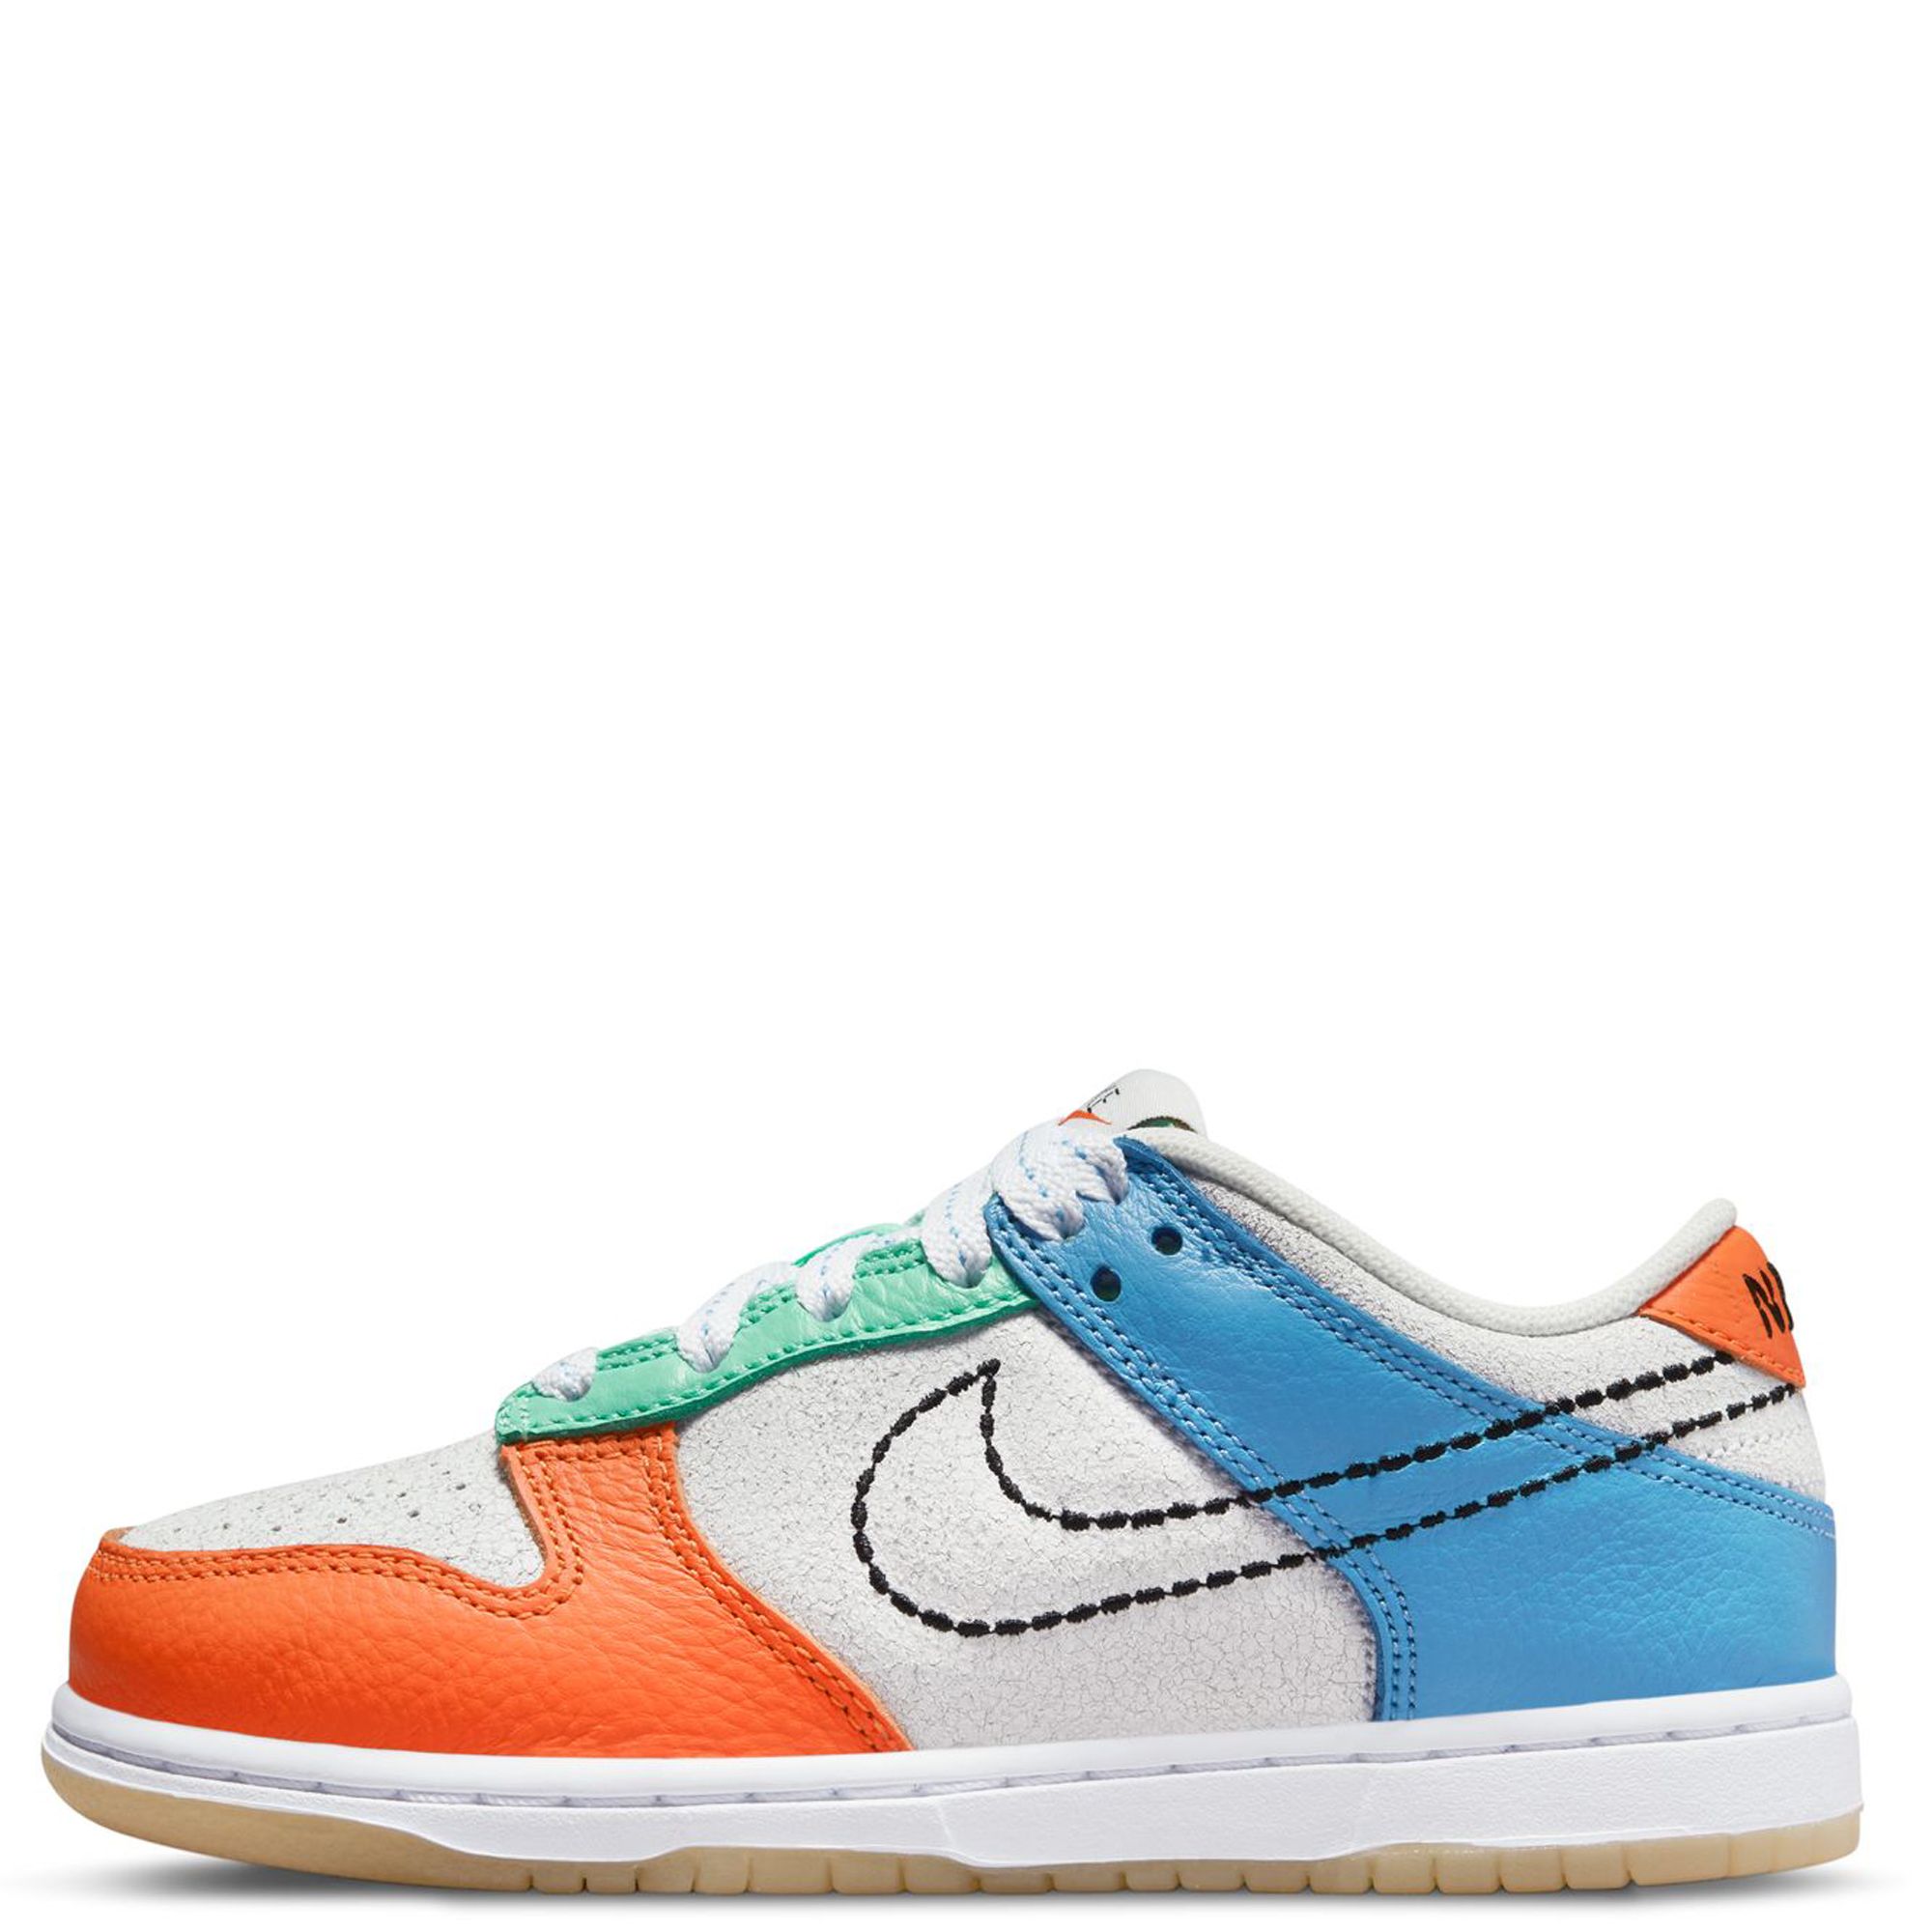 Nike Dunk Low Champ Colors Release Guide